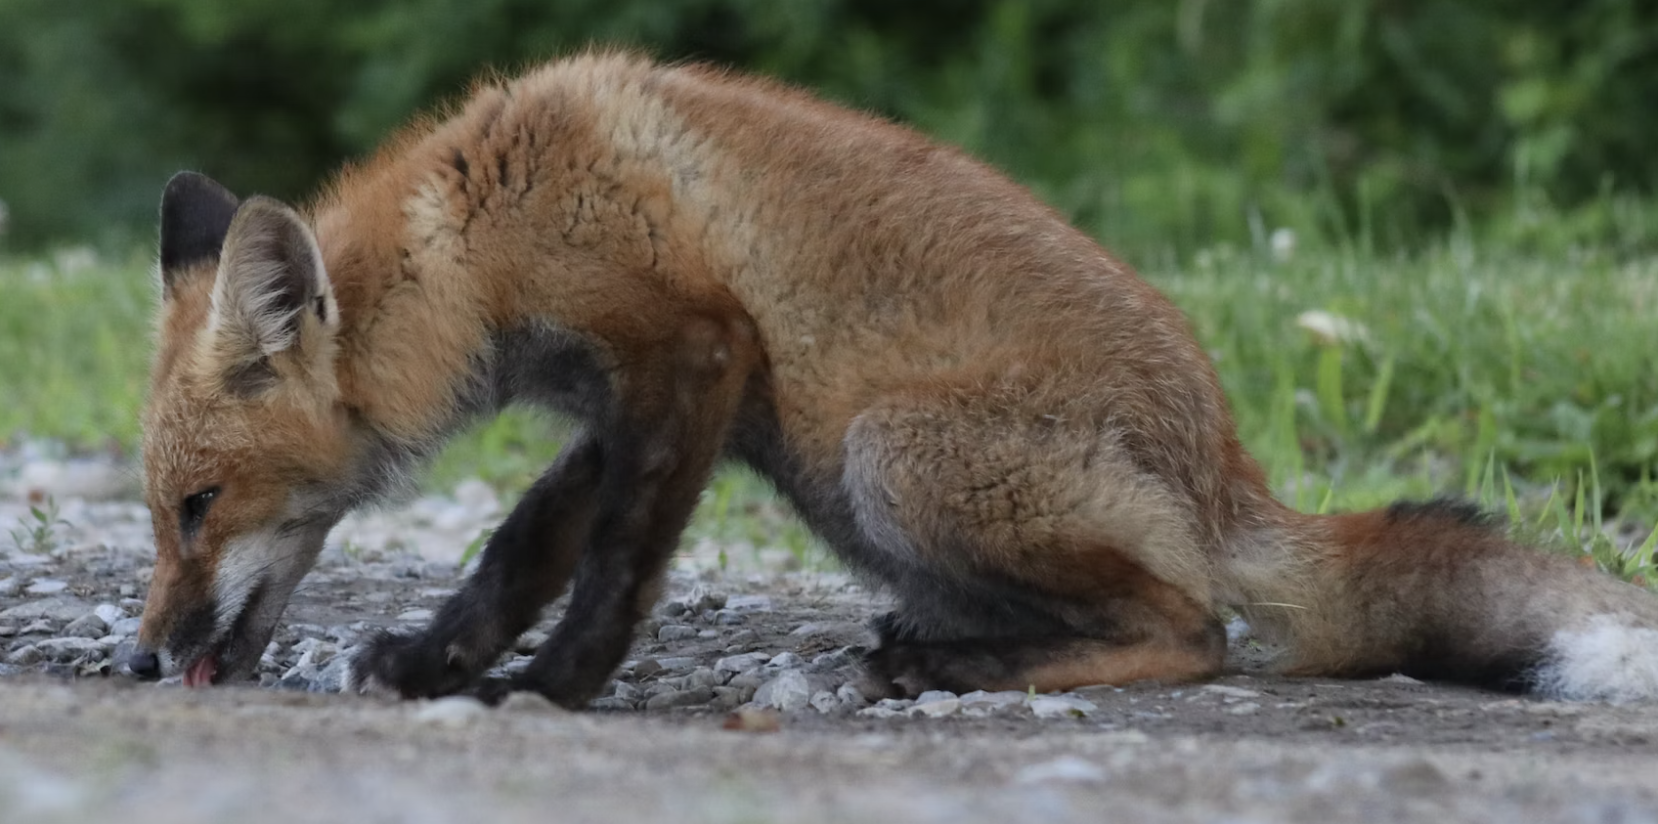 Fox licking water from a pond